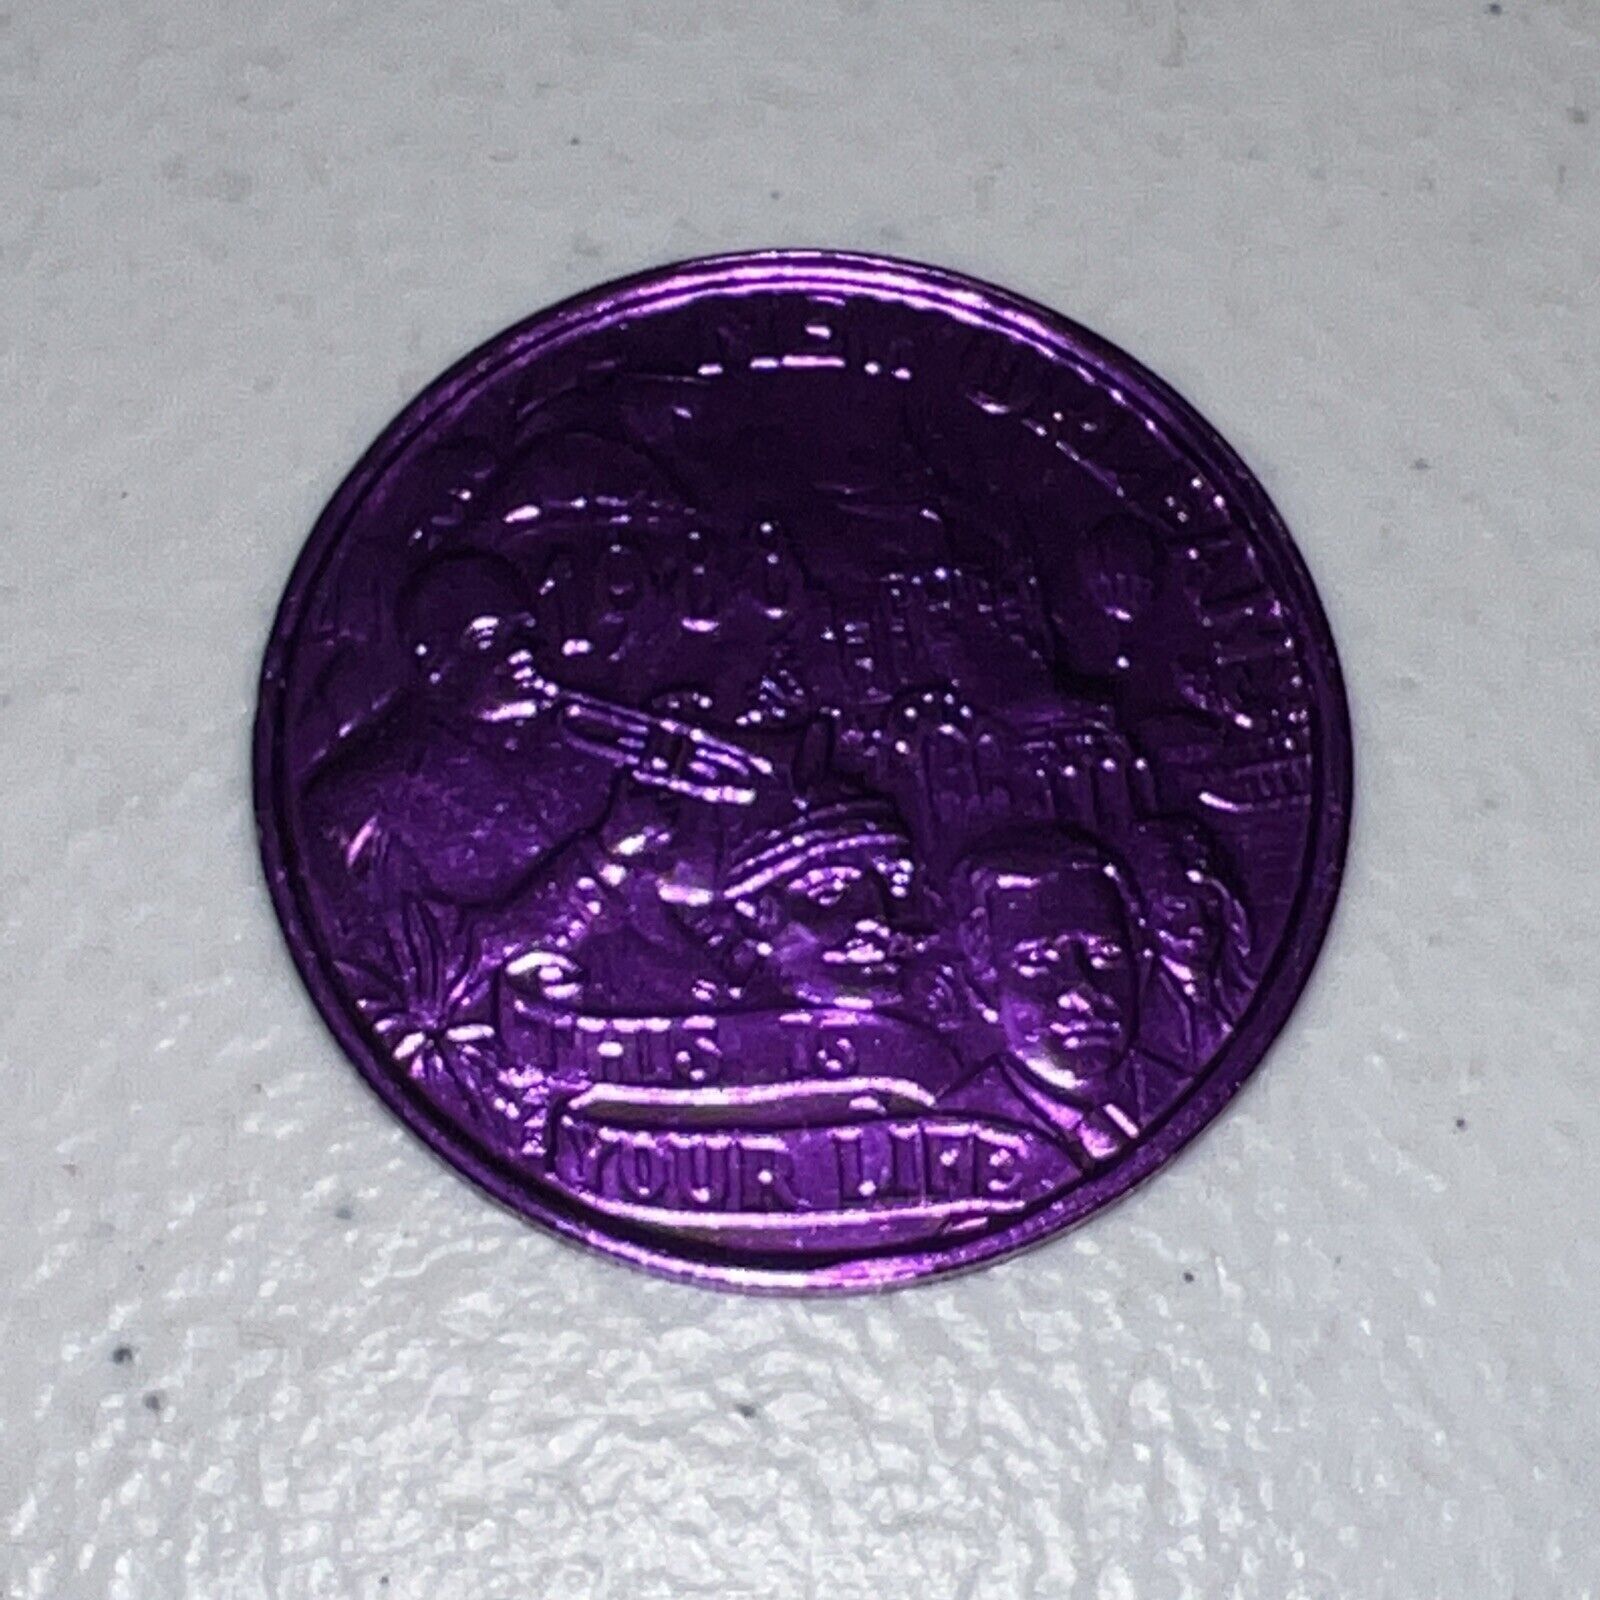 vintage purple 1988 mardi gras token new orleans coin this is your life